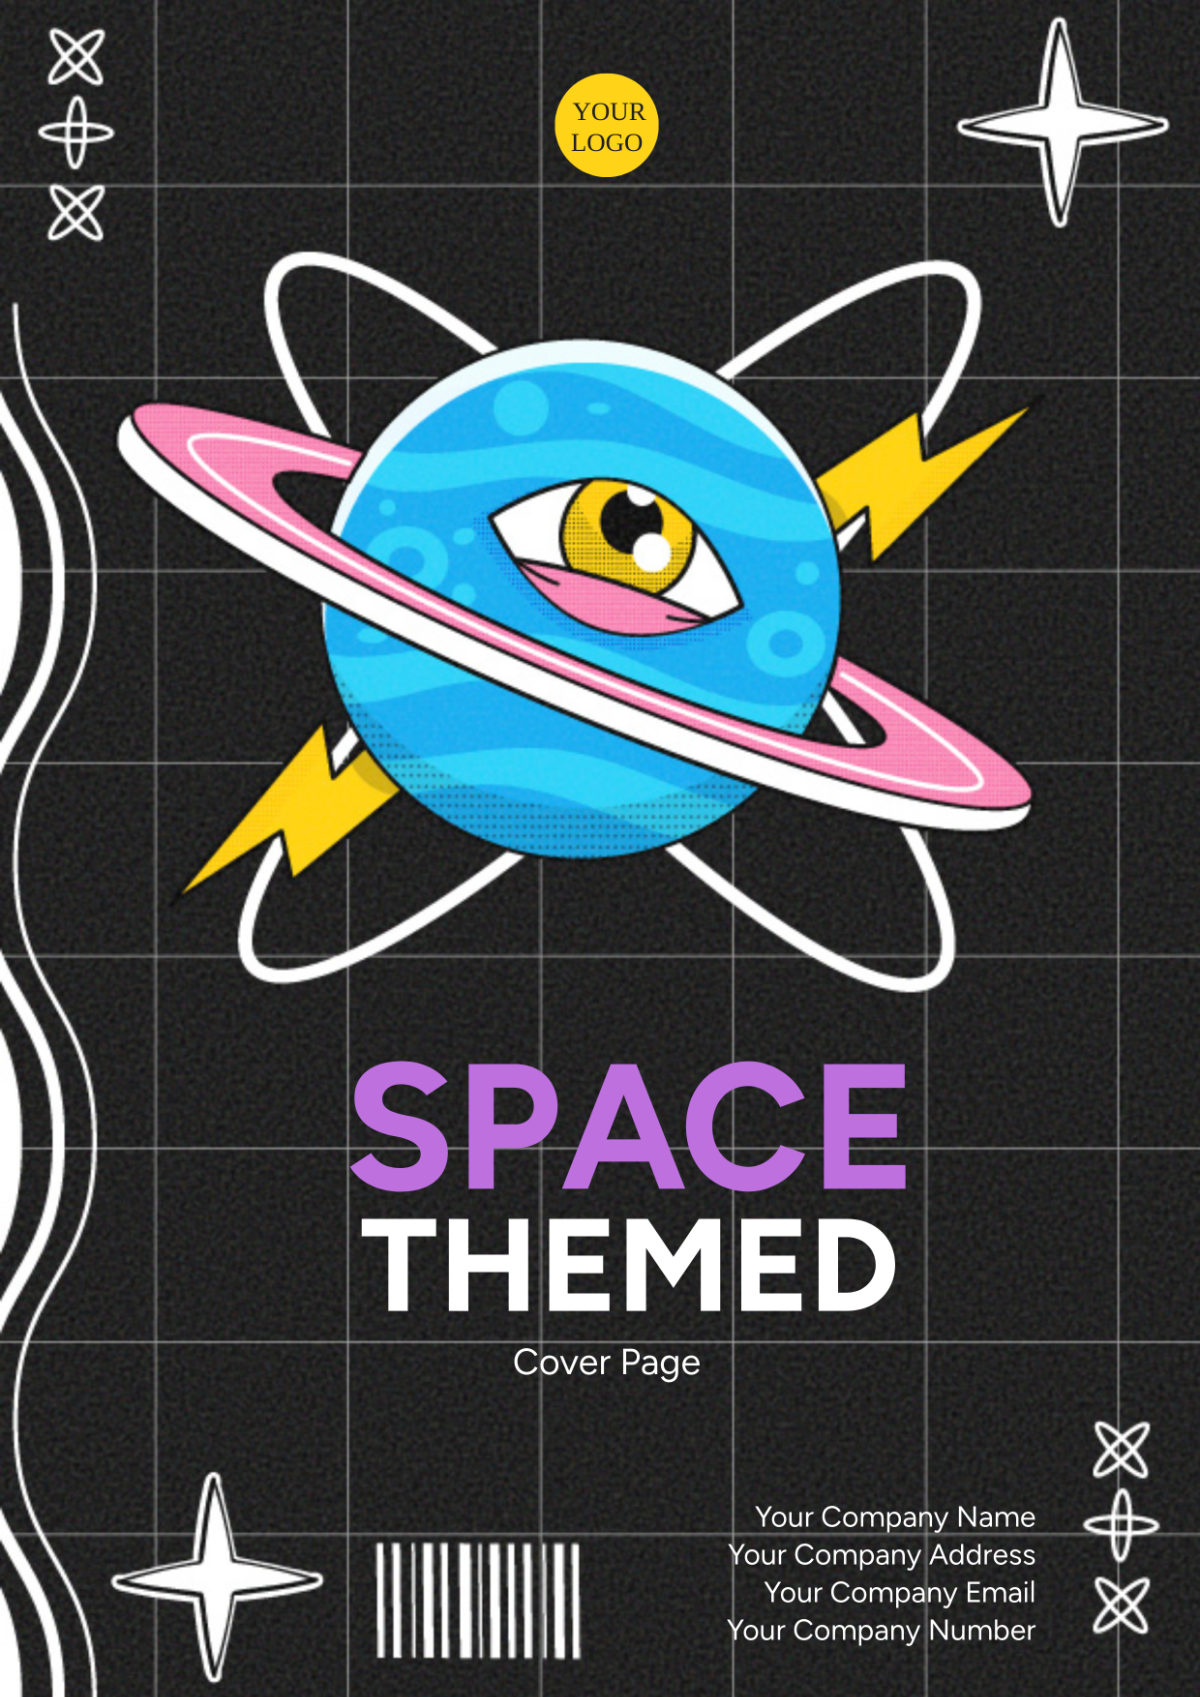 Space-Themed Title Cover Page